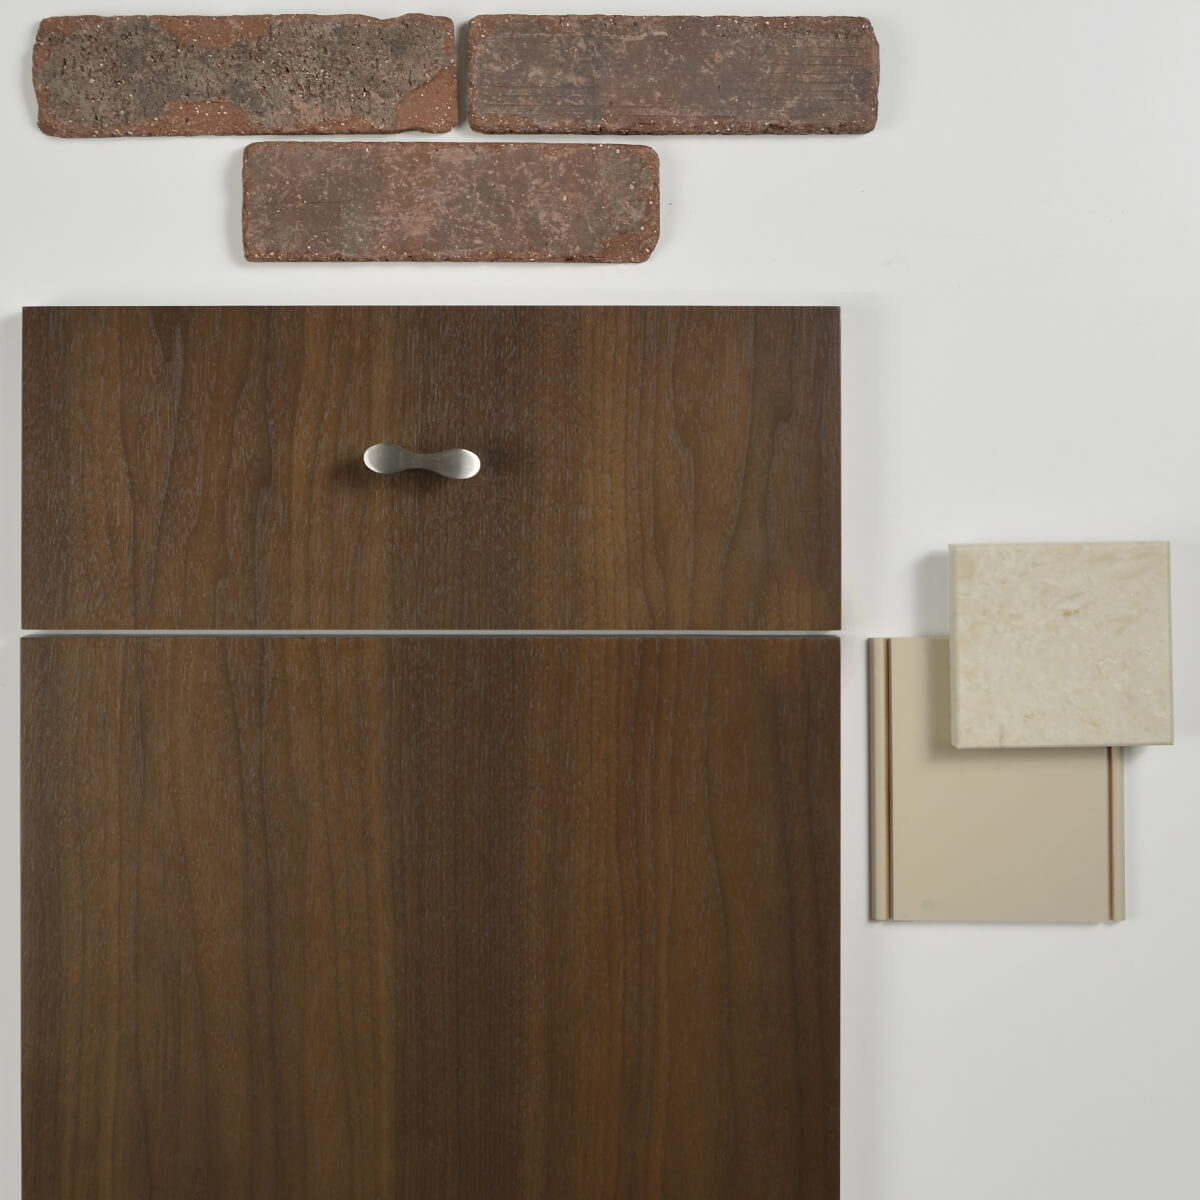 An industrial style mood board with a slab styled walnut cabinet door, samples of red brick backsplash tiles, and an off-white, beige paint and countertop sample.